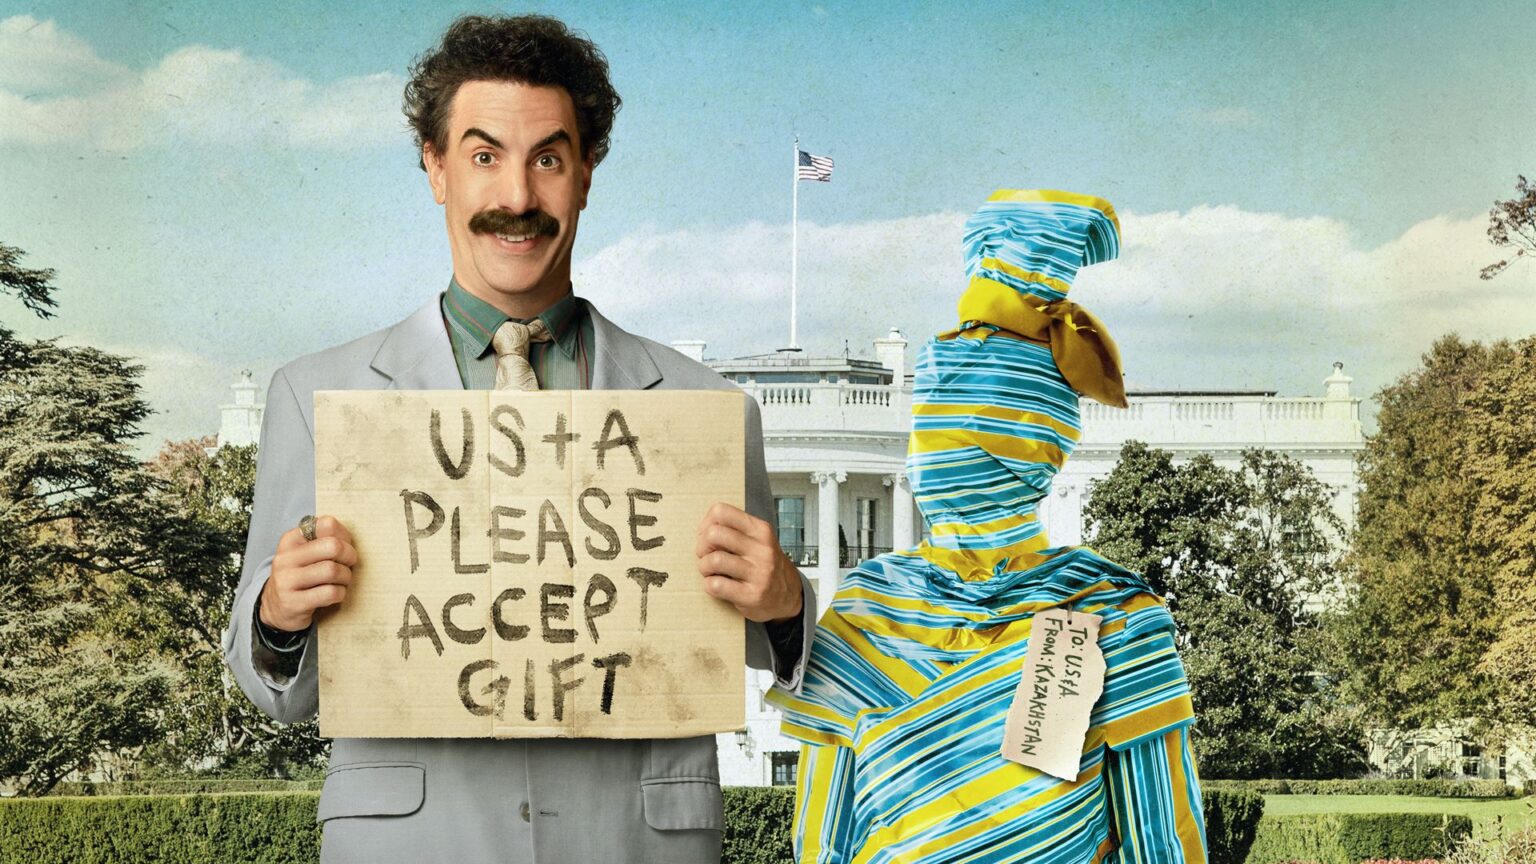 Borat, the character created by Sacha Baron Cohen has certainly had some cringy moments in his films. Care to learn what we think is the worst?